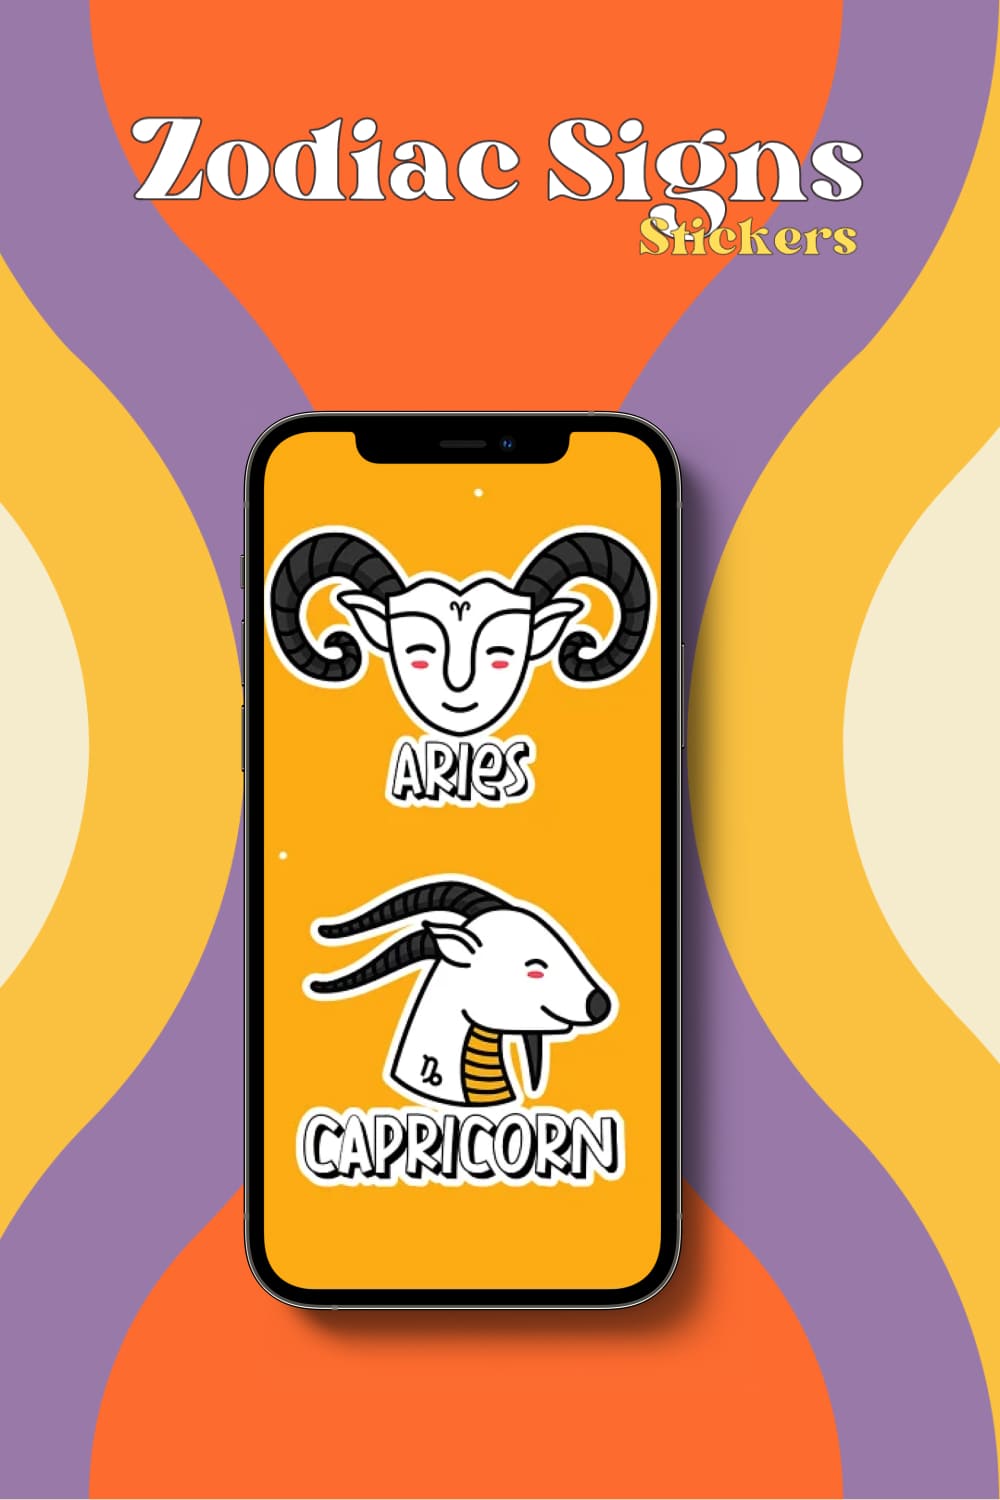 Zodiac Signs Stickers - phone preview for the Pinterest image.